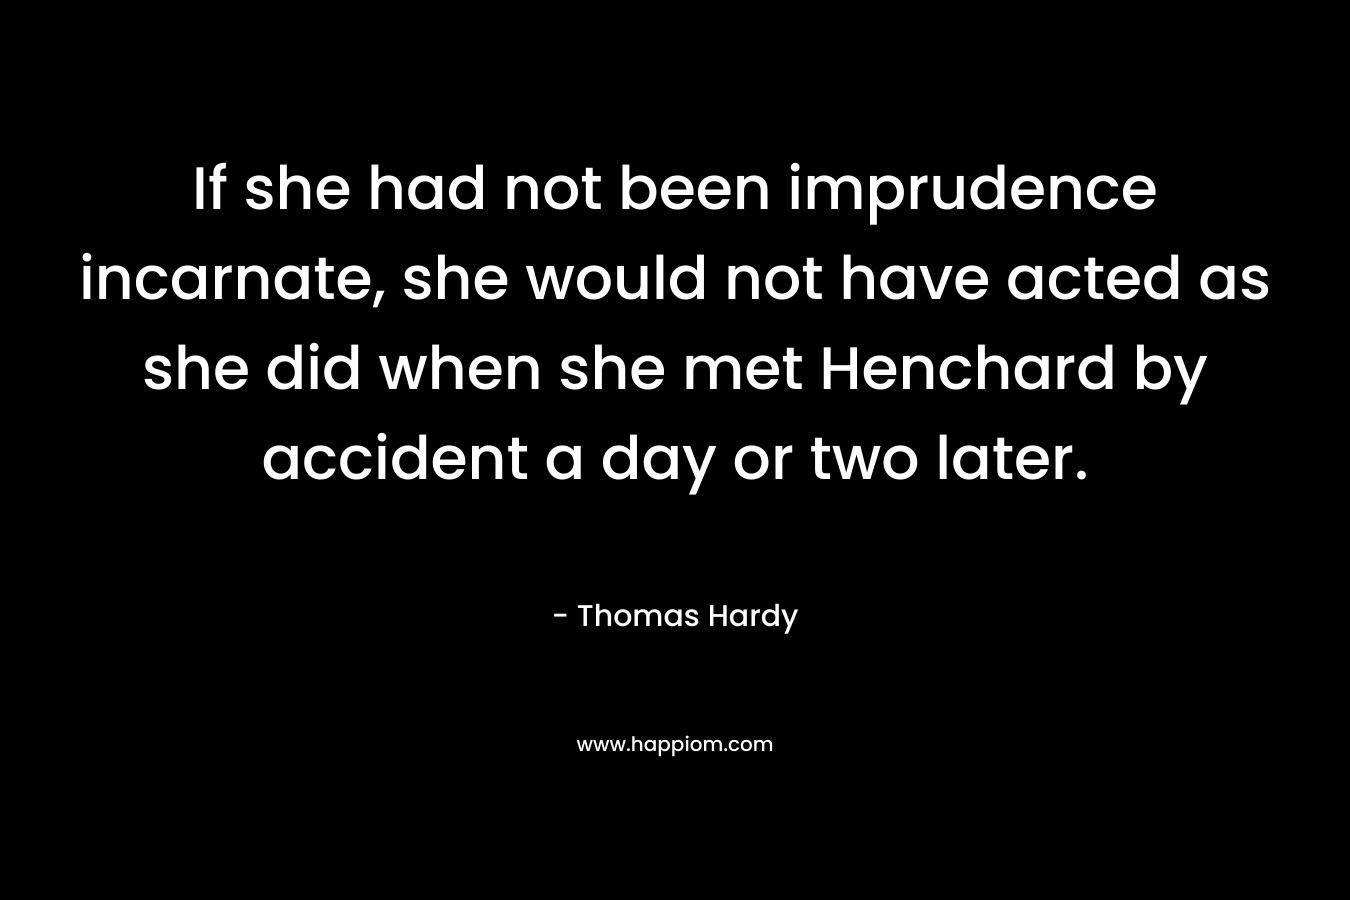 If she had not been imprudence incarnate, she would not have acted as she did when she met Henchard by accident a day or two later. – Thomas Hardy